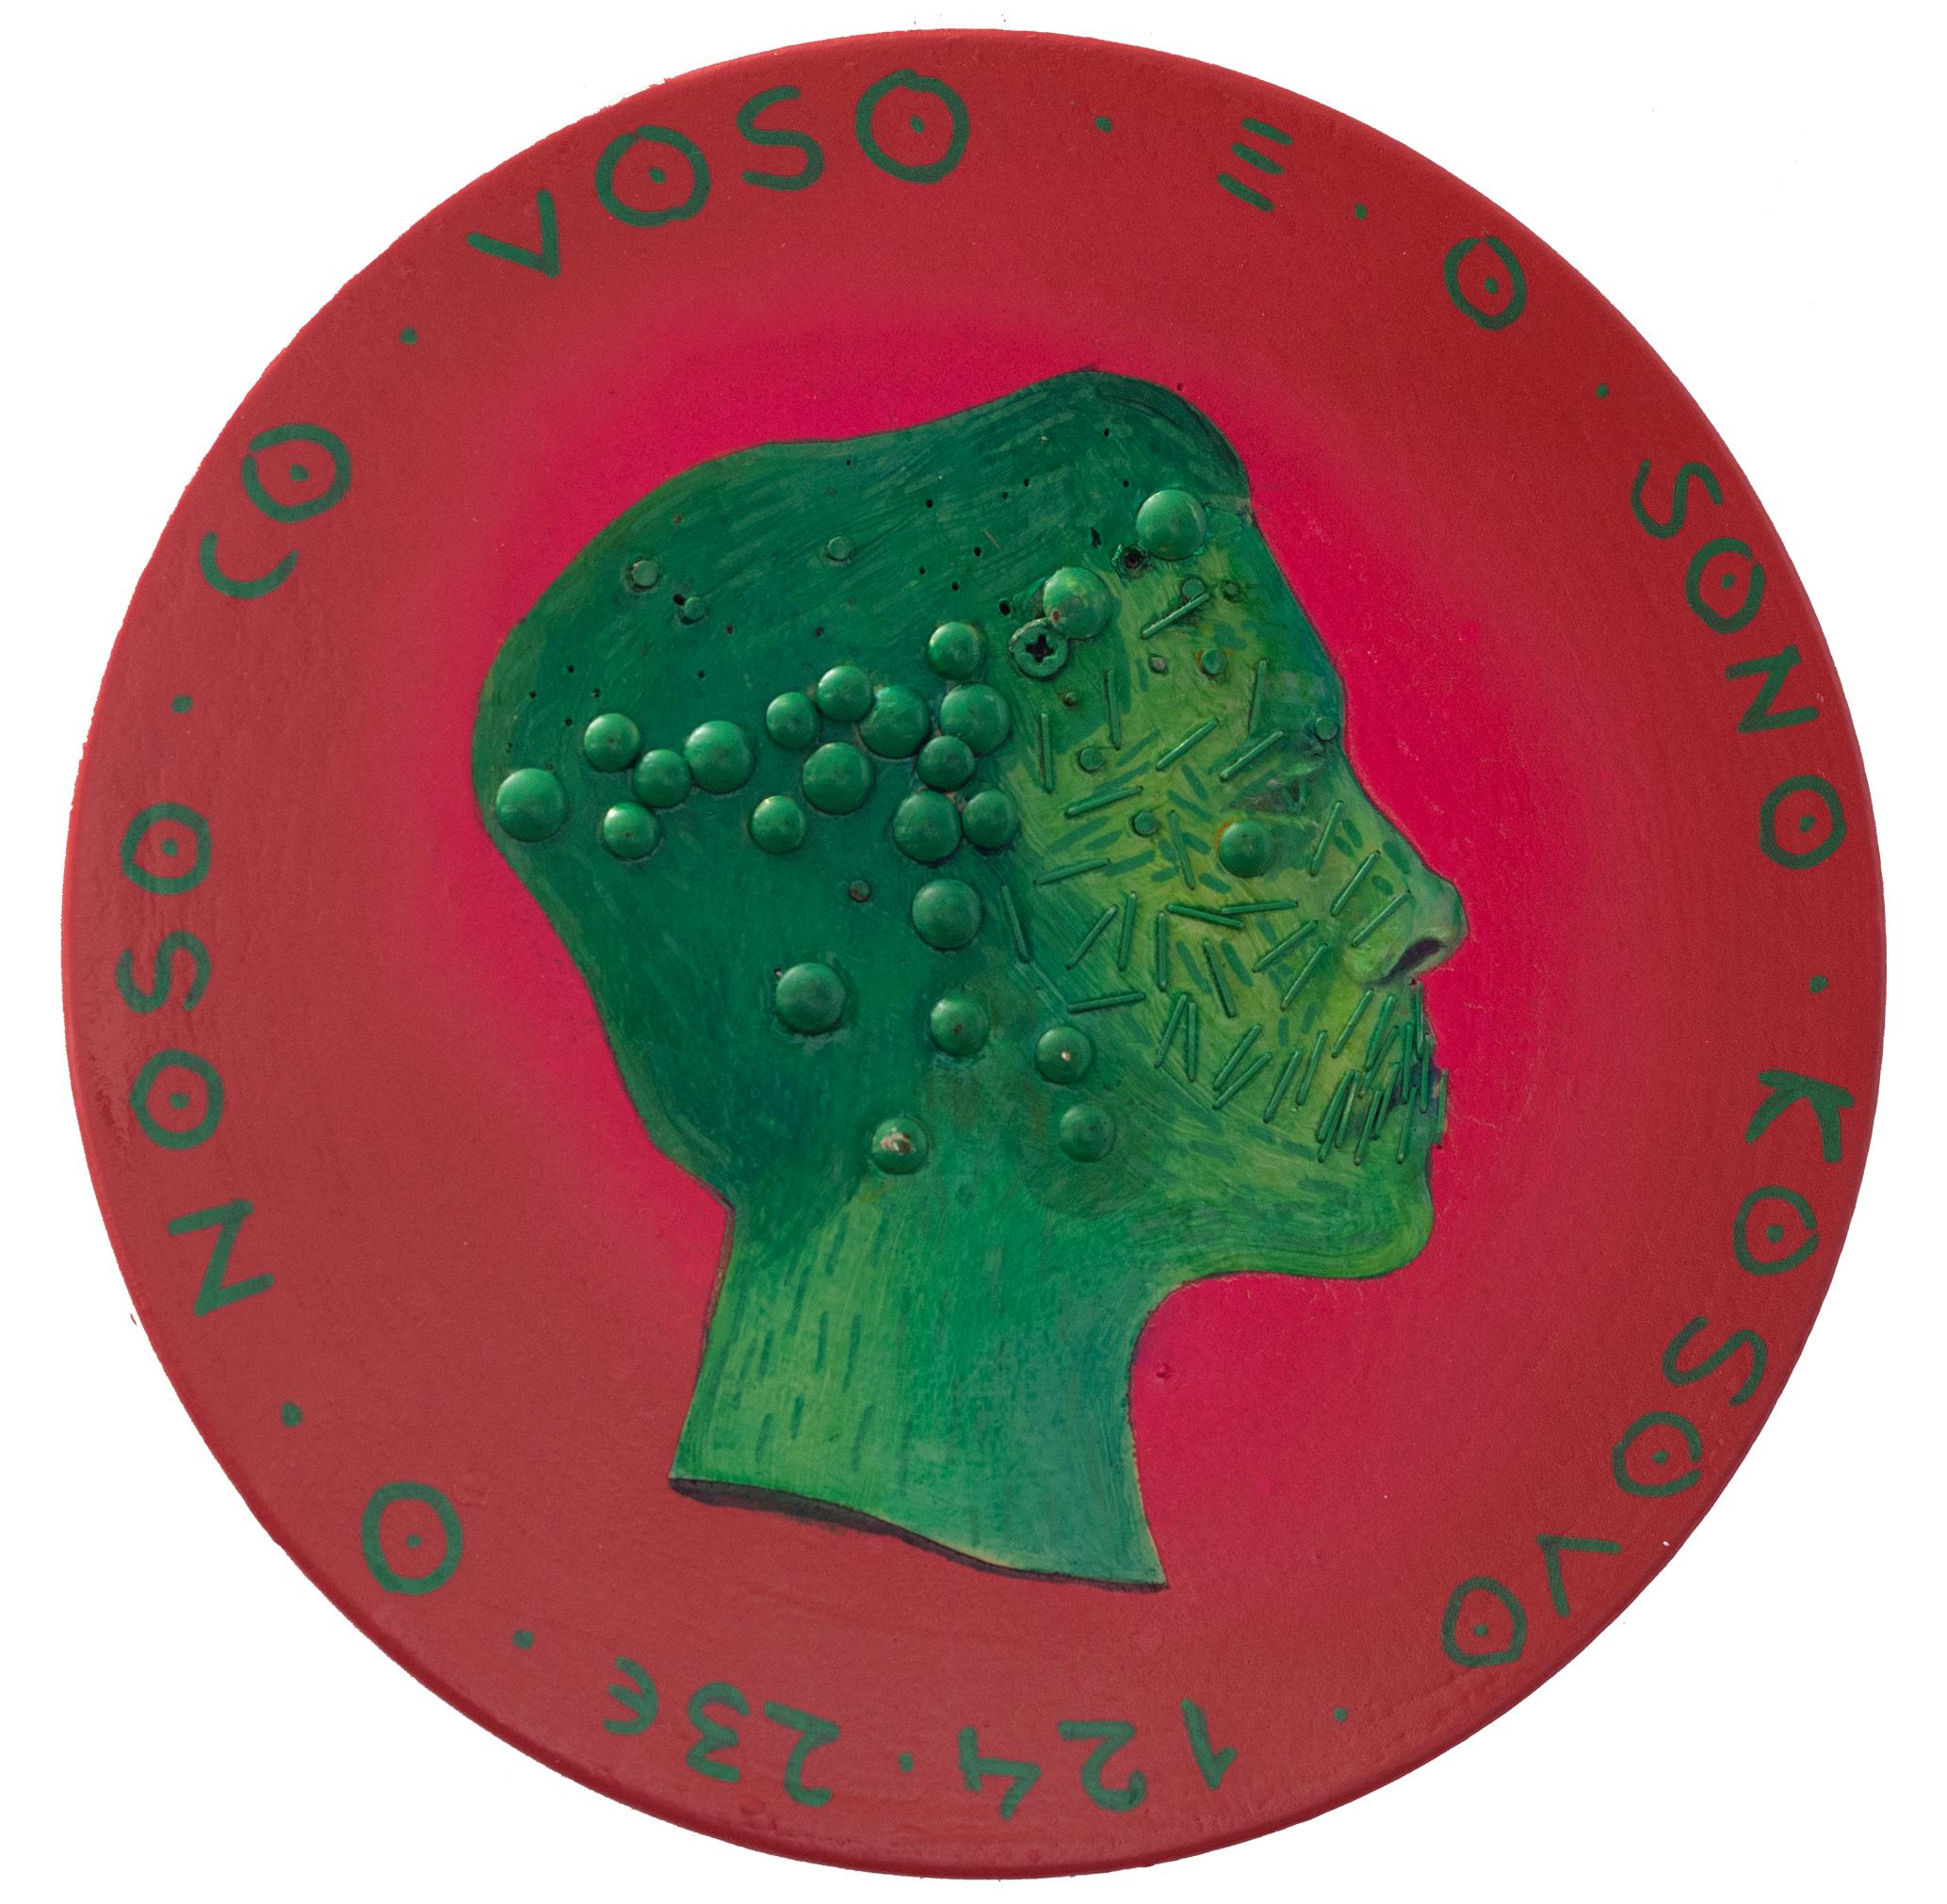 Contemporary Mixed Media Side Profile Portrait. Red And Green.  "Currency #205"